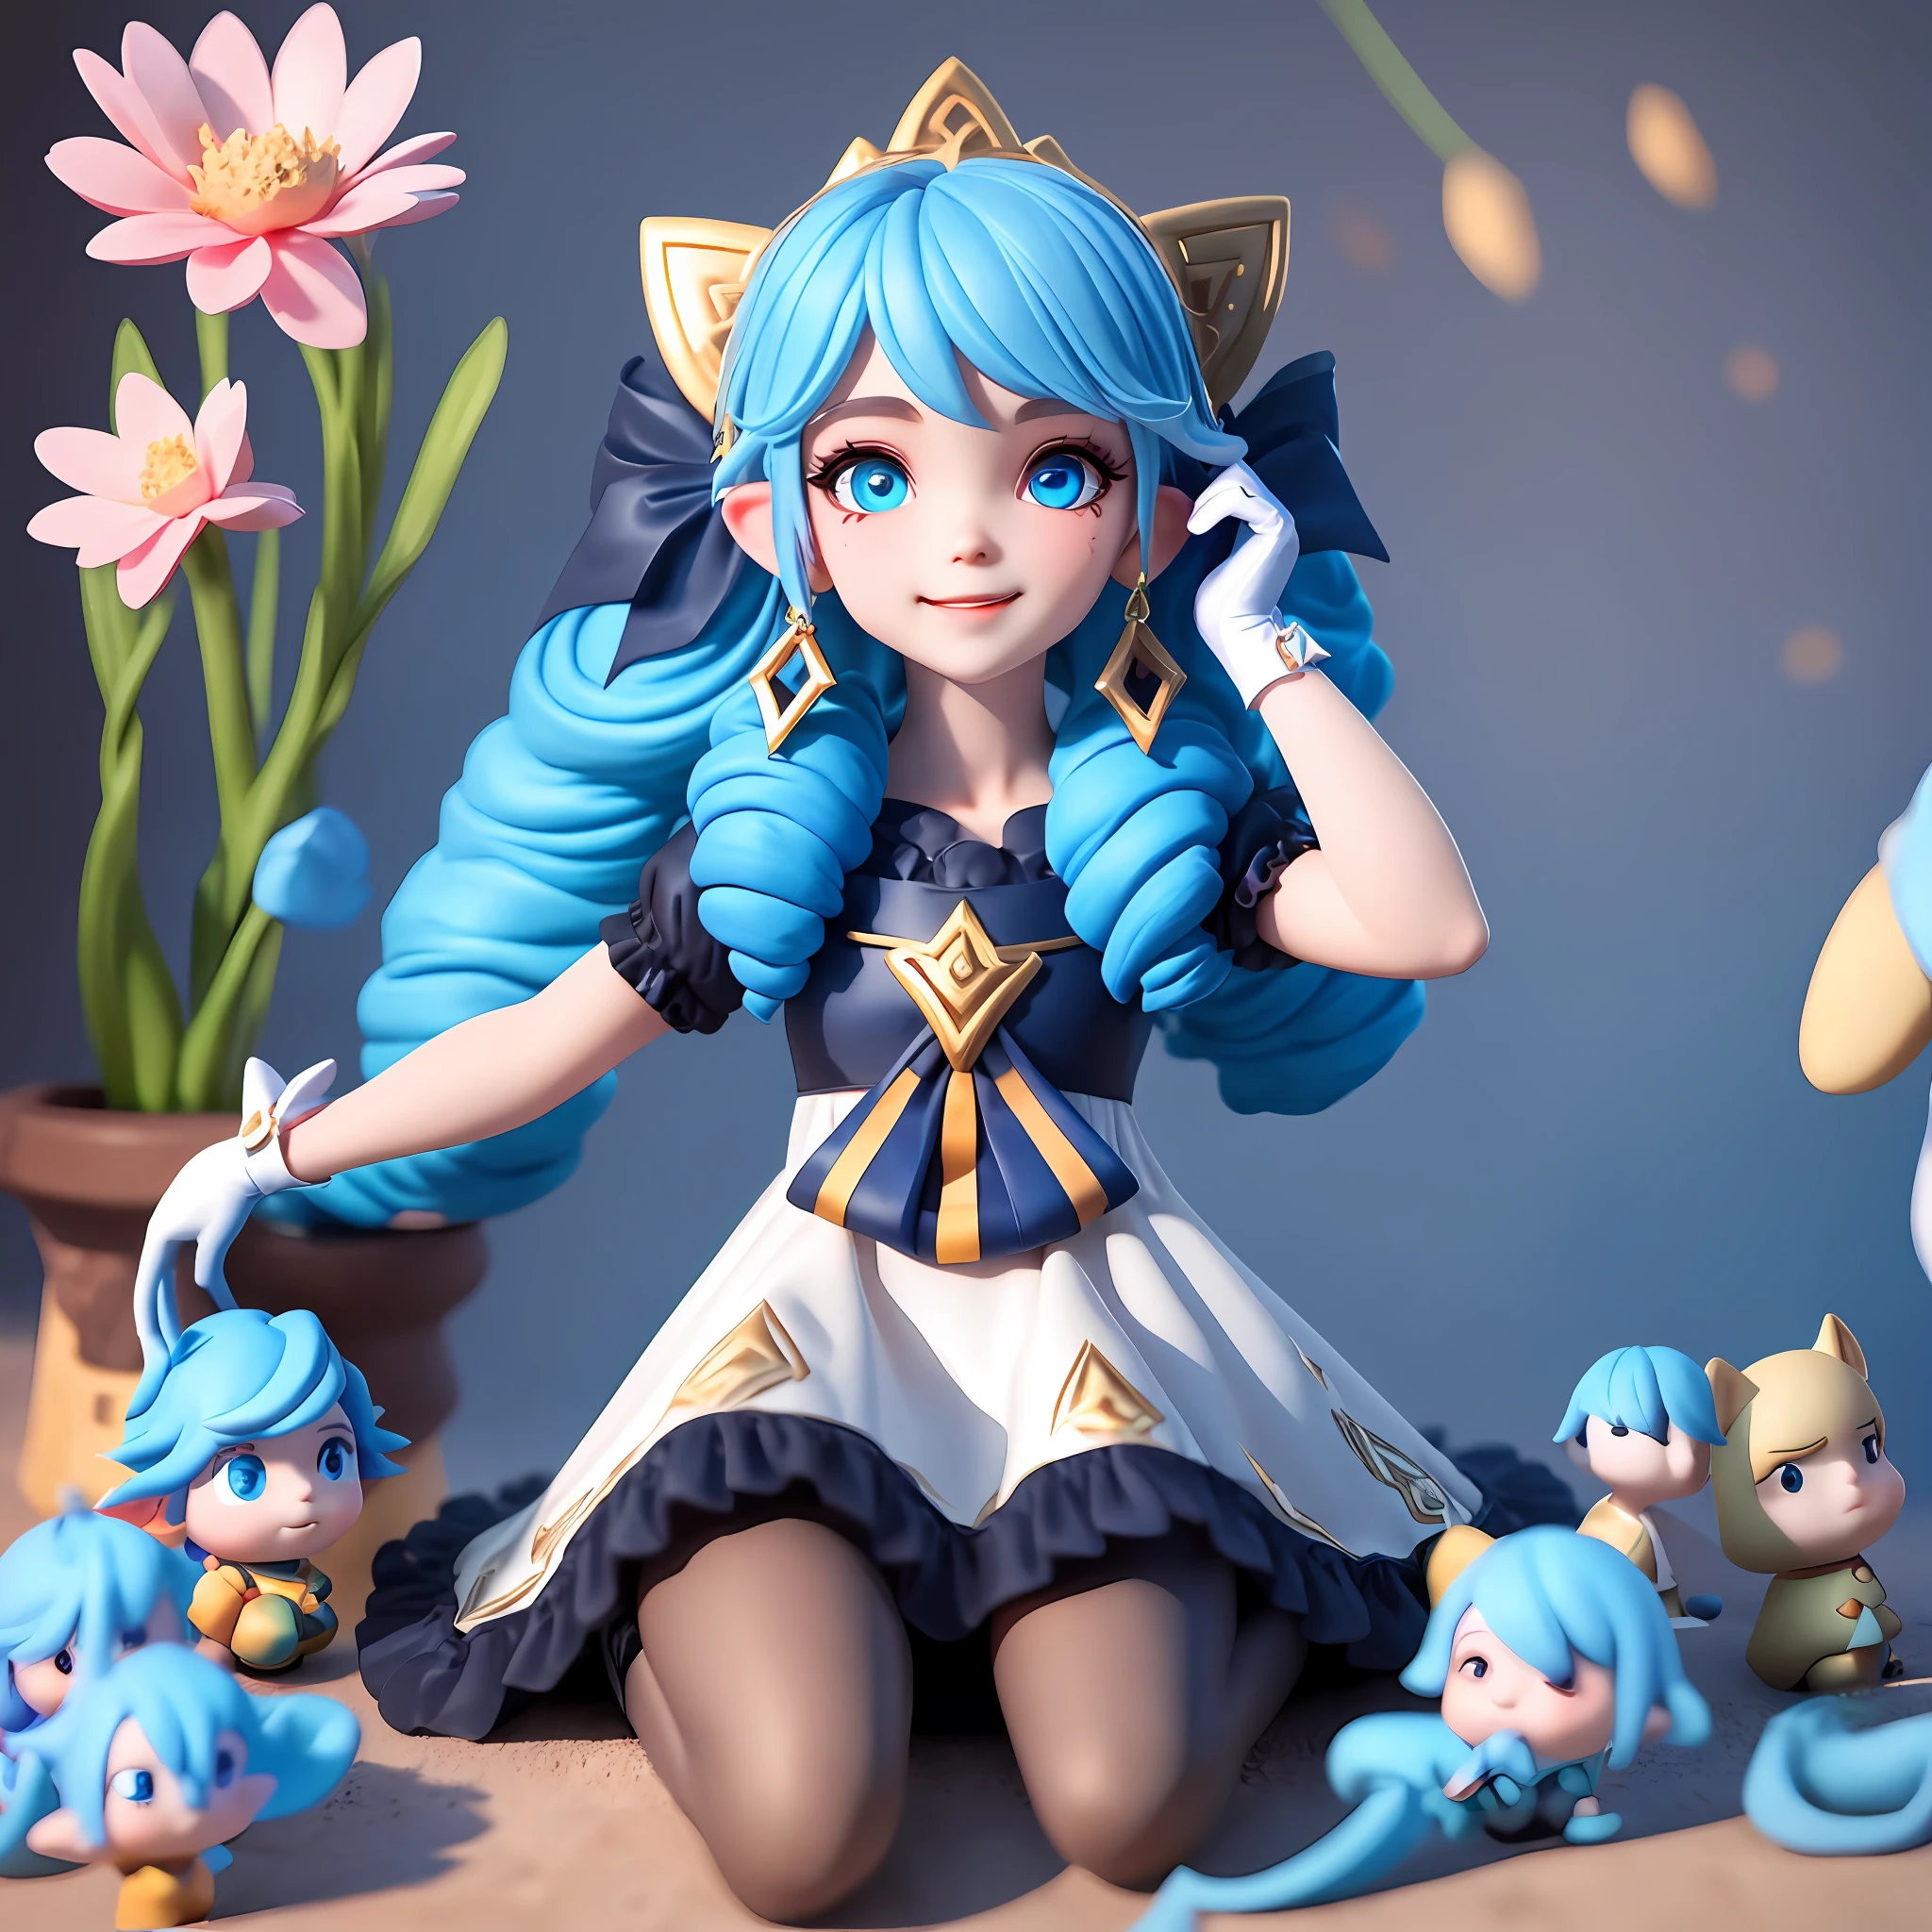 （1girls），Single person, Black bow, Black gloves, black legwear, blue eyes, Blue hair, clarkbone,Spiral braids， dress, Drill hair, Frilled dress, frils, mitts, gwen\(league of legend), hair accessory，high - resolution，League legendary，slong hair，Split lips，puff sleeves，Pink pupils，smiled，solo，White dress，x，x hair accessories，Lying down，Sit，inside room，semi naked，Delicate hair，Arm carving，Blue hair，blossoms，Delicate shoes，Depiction of facial features，Delicate facial features，Eye portrayal，Delicate hair，Popmart blind box，Clay texture，the golden ratio，Black and white background，natural day light，the best qualityt，ultra detail，3d art，C4D, OC renderer, 3d rendered, 8K，Various actions，Blushlush，Q version，Gnome，Round toot